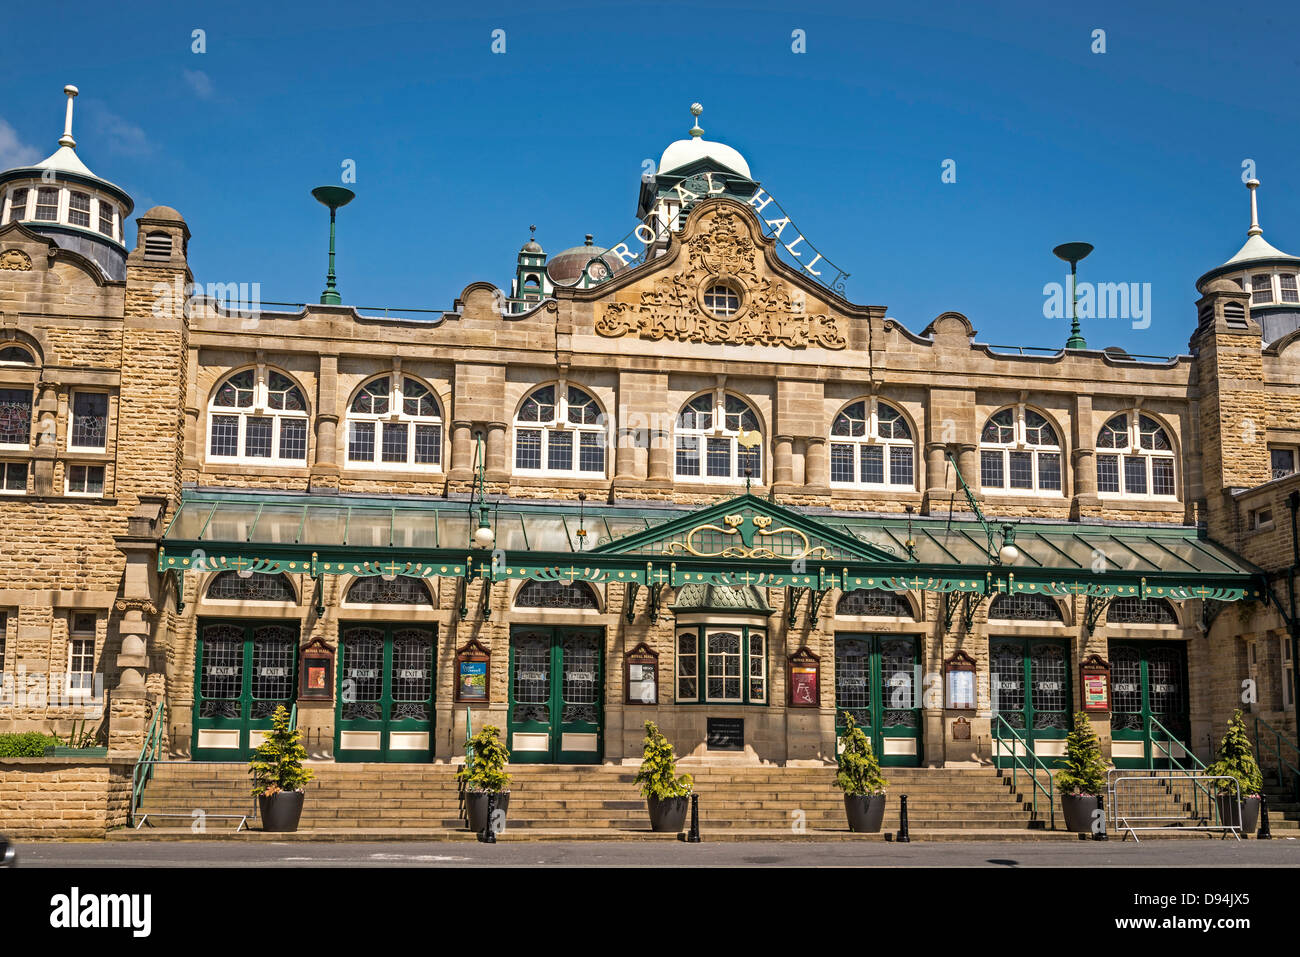 Harrogate's Royal Hall, an Edwardian Theatre built in 1903, is a venue for events, arts and entertainment. Stock Photo